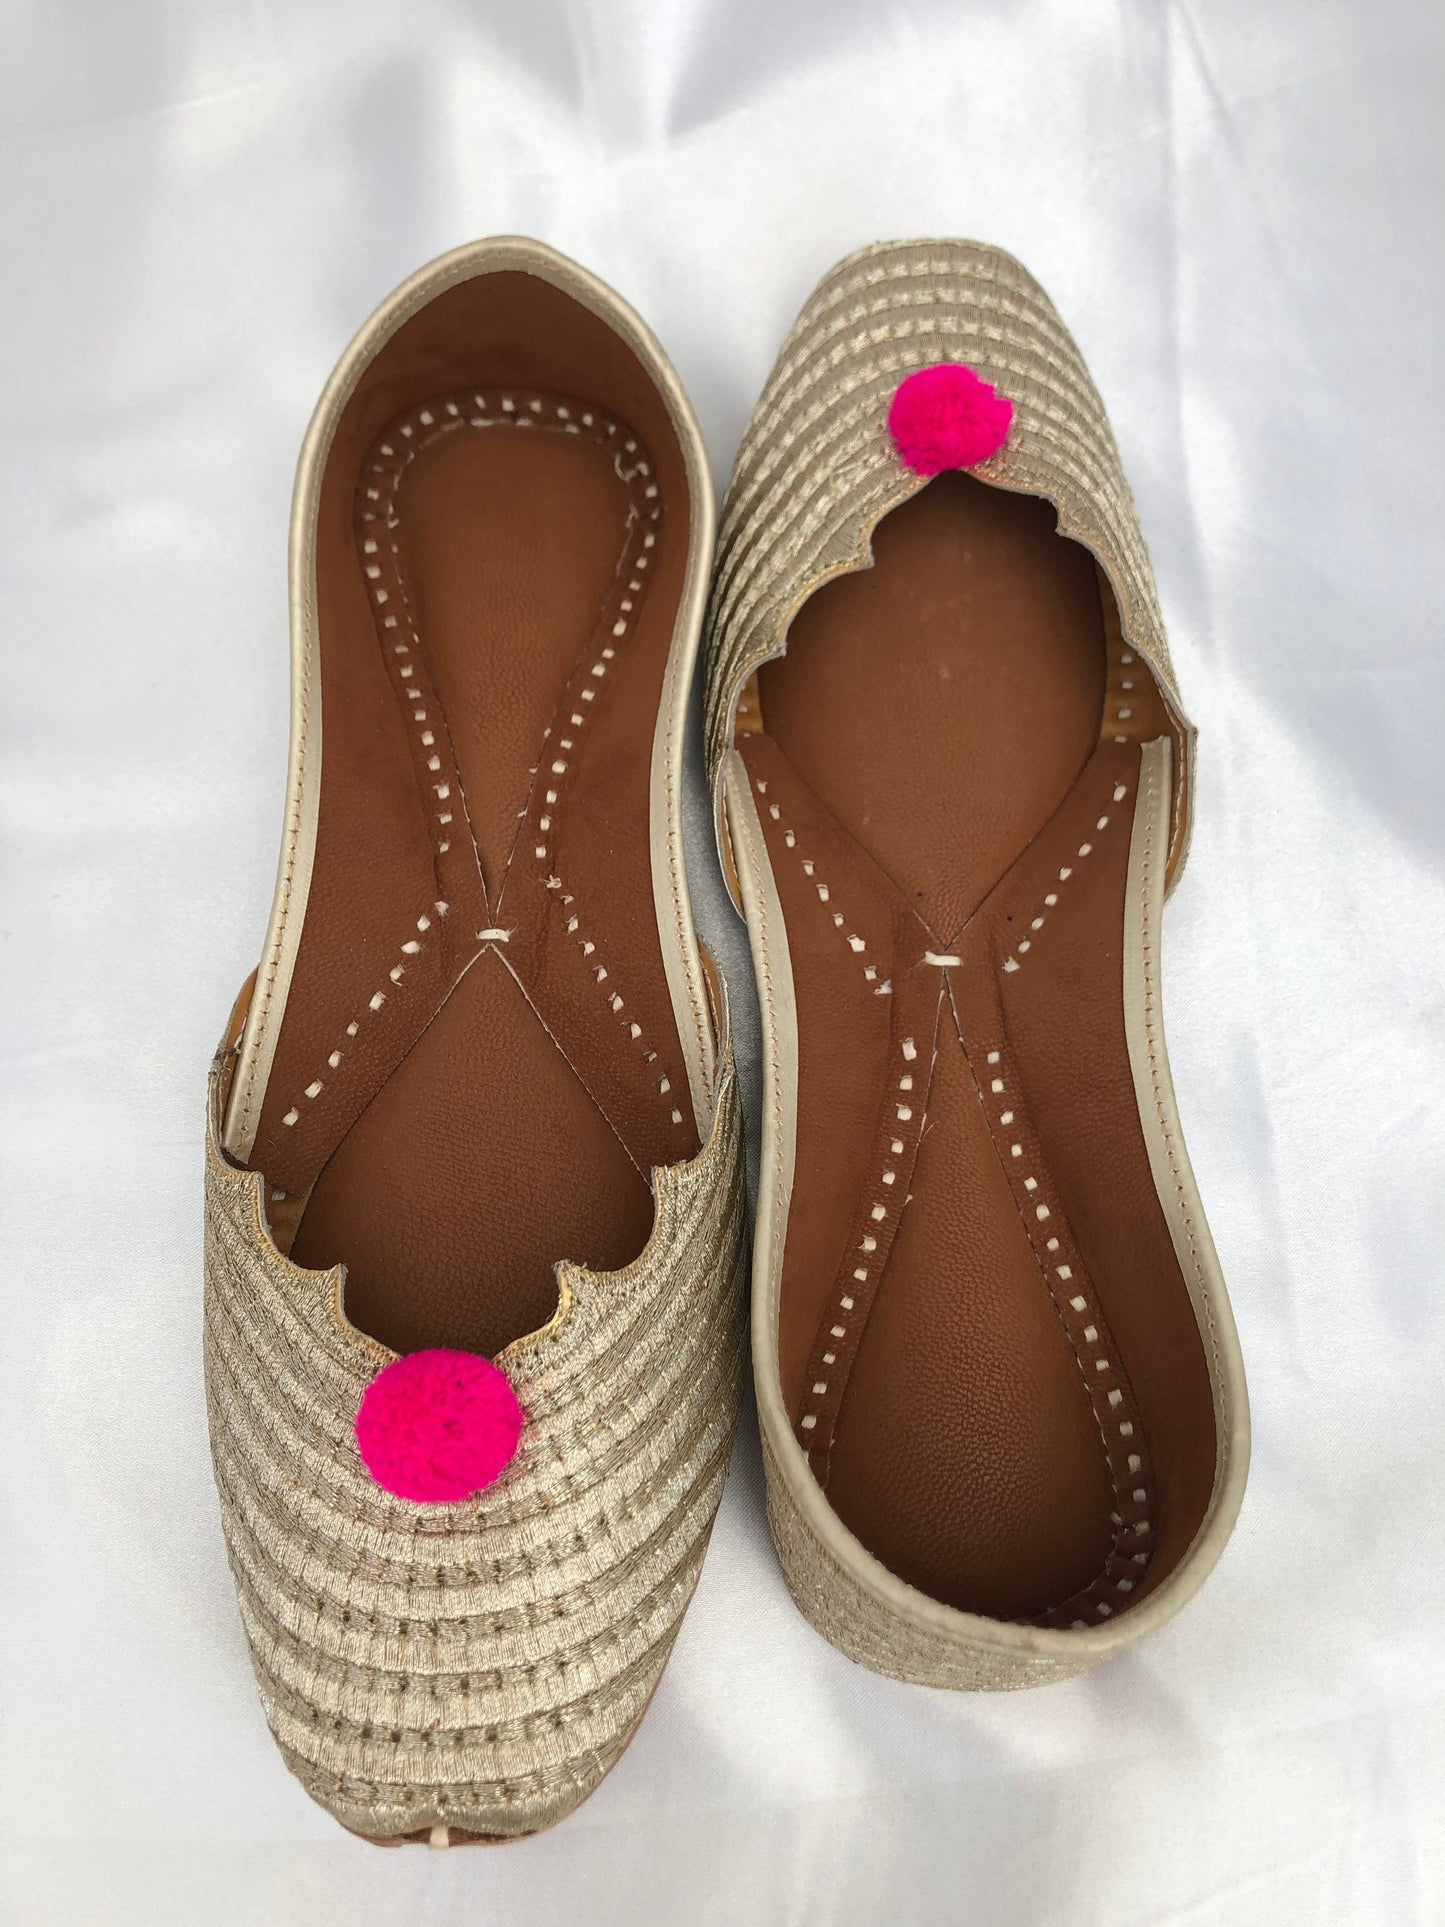 Punjabi Jutti / Jooti with Hot Pink Pom Pom and All over embroidered Bride’s Woman Shoes US Size 5,6 UK 3,4